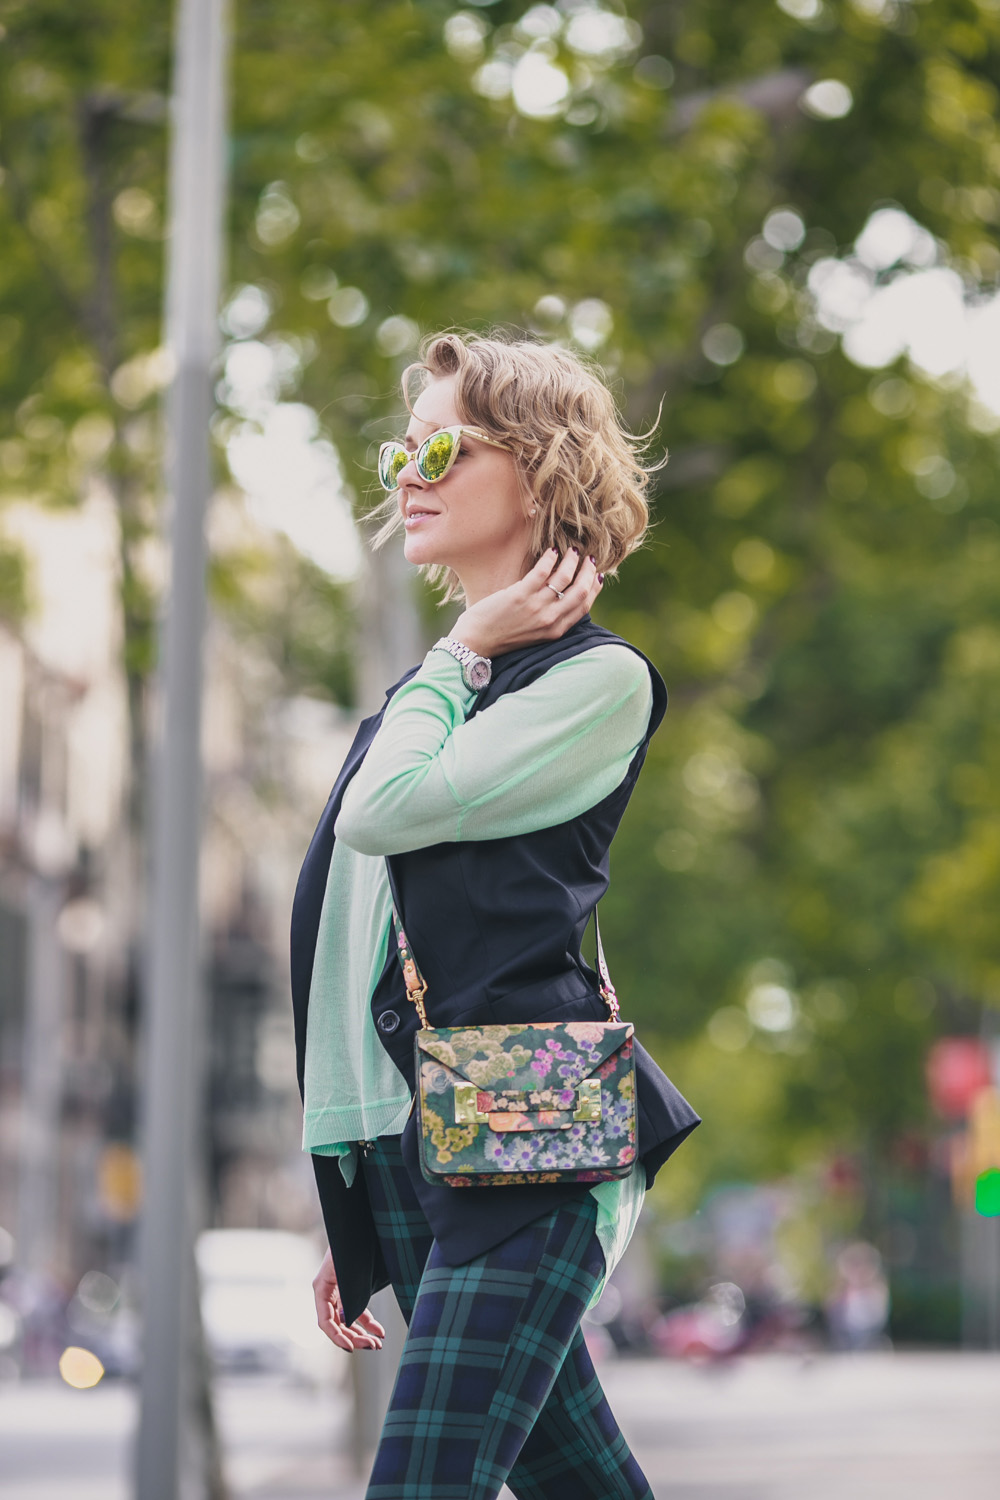 darya kamalova fashion blogger from thecablook in Barcelona wears sophie hulme flower bag with santa clara loafers and sheinside tartan green pants-3218 copy